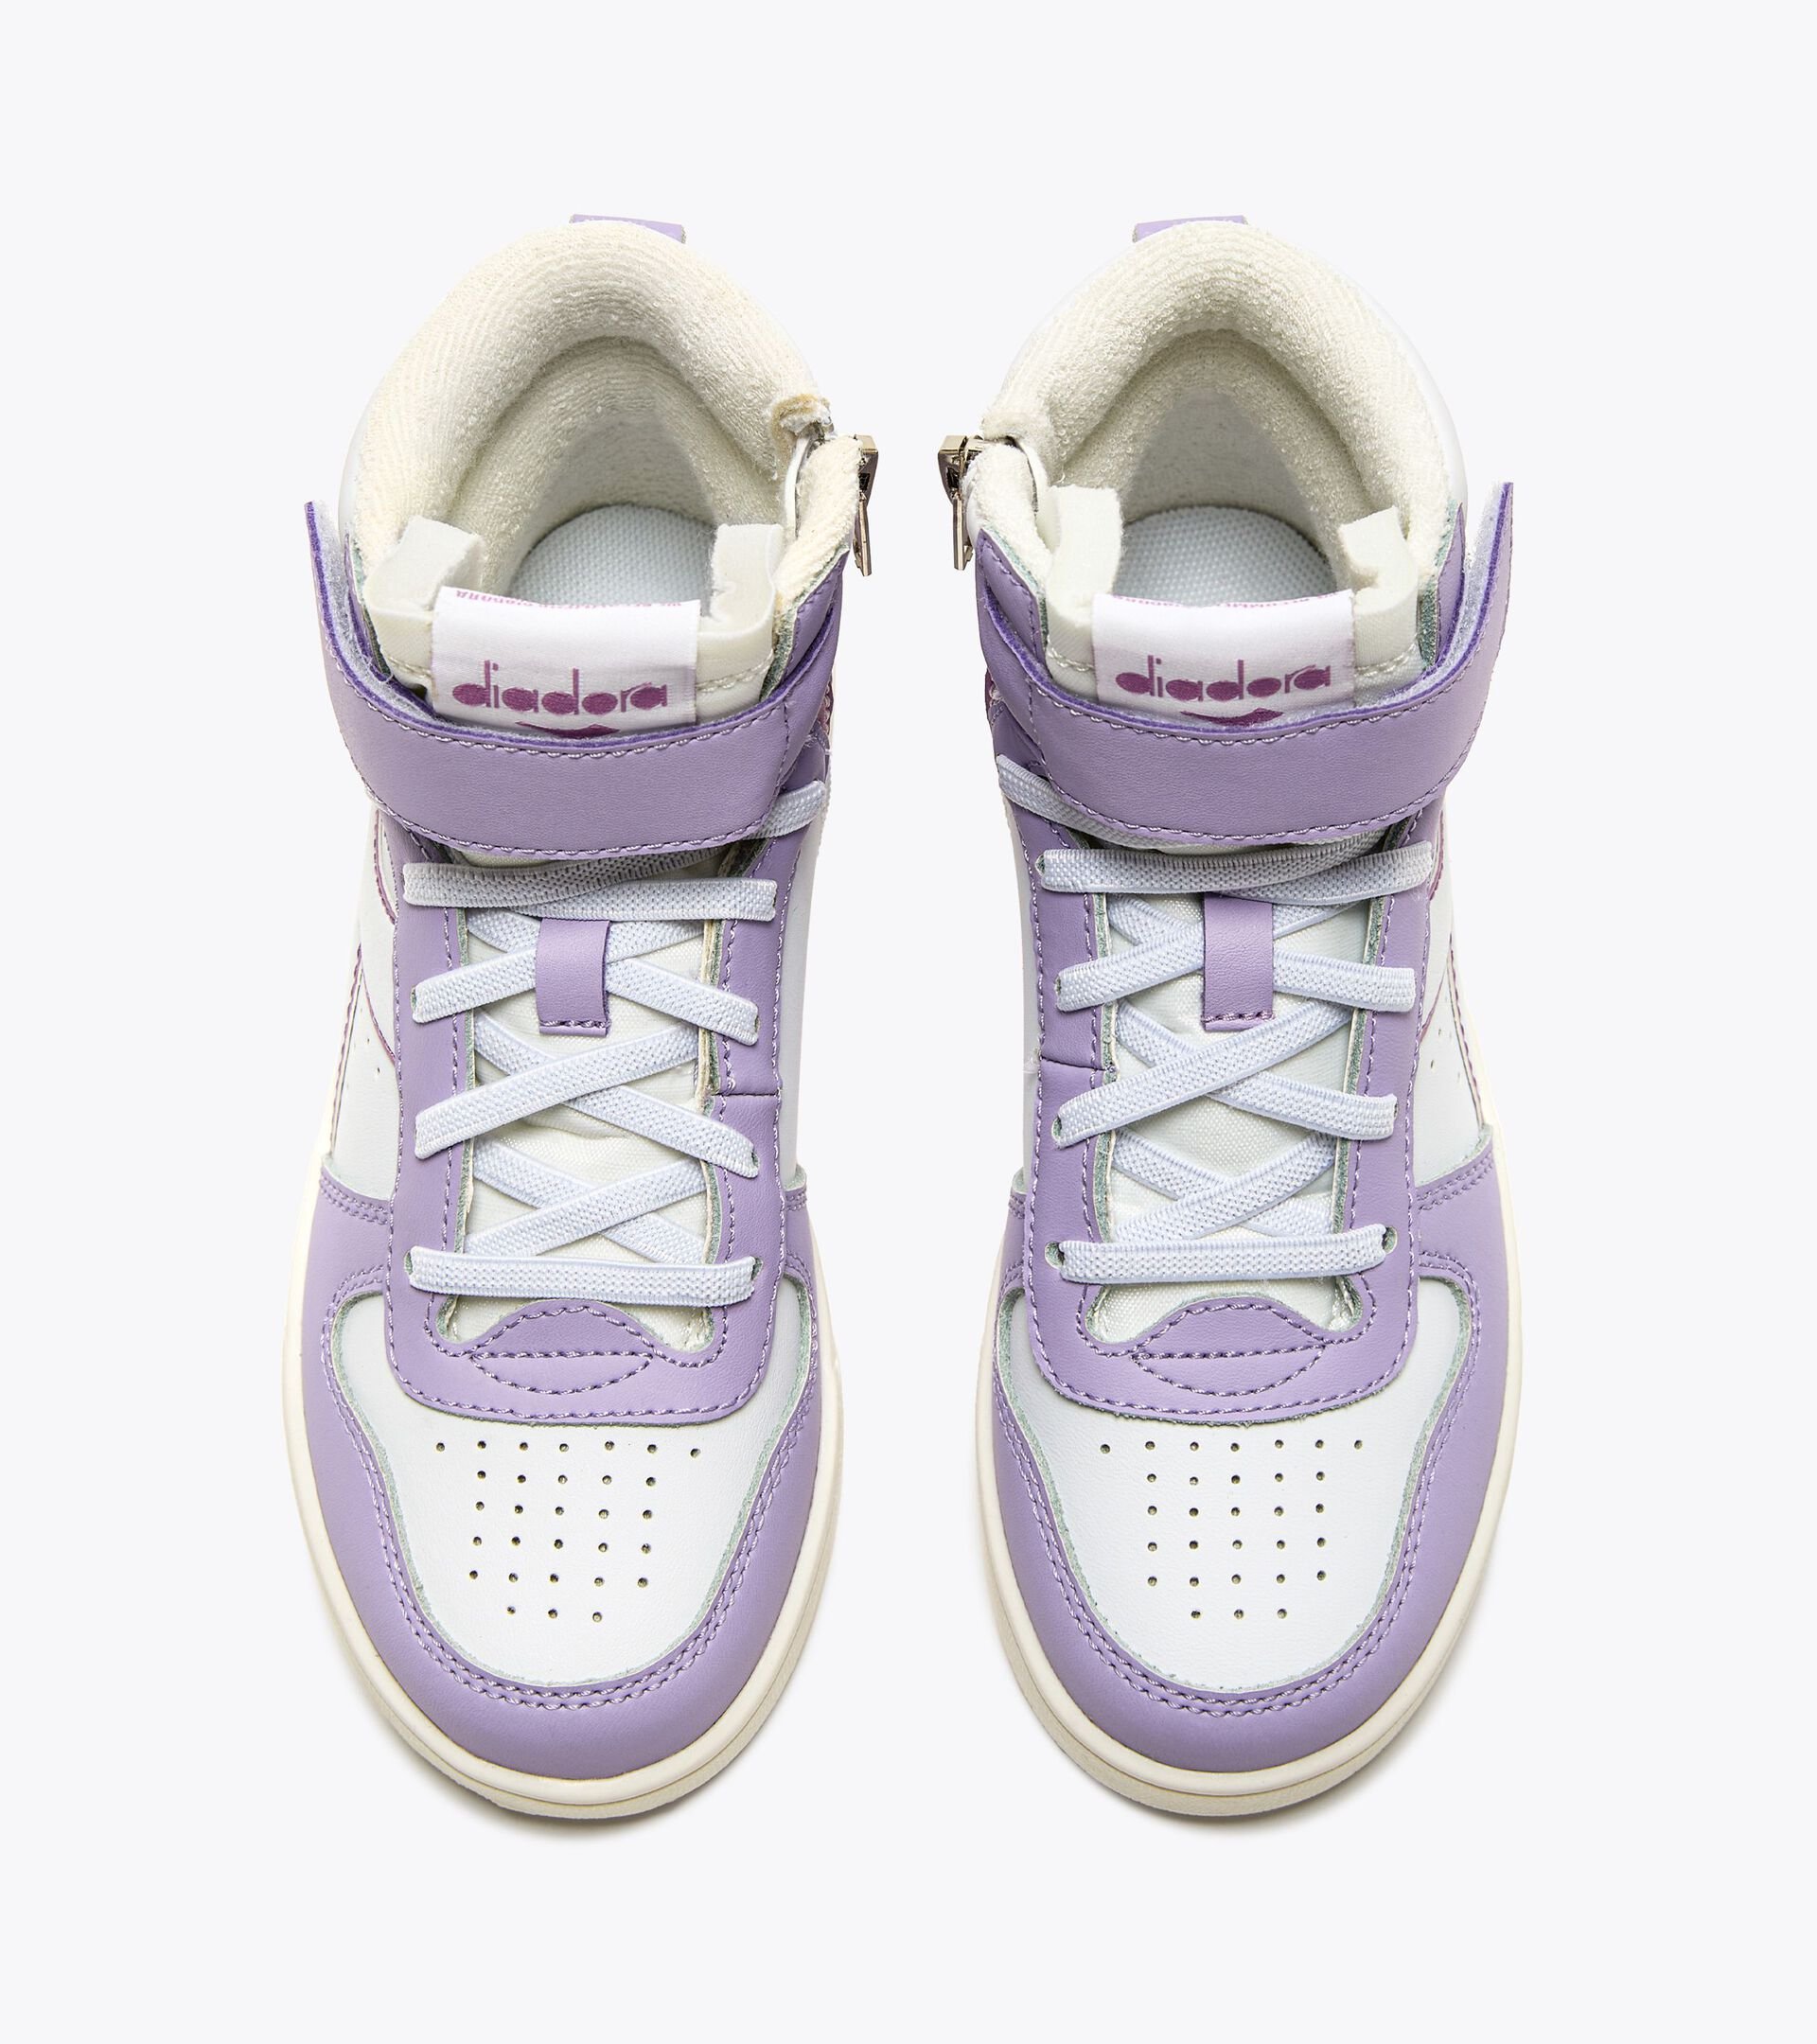 Sports shoes - Kids 4-8 years MAGIC BASKET MID PS MULBERRY/WHITE - Diadora